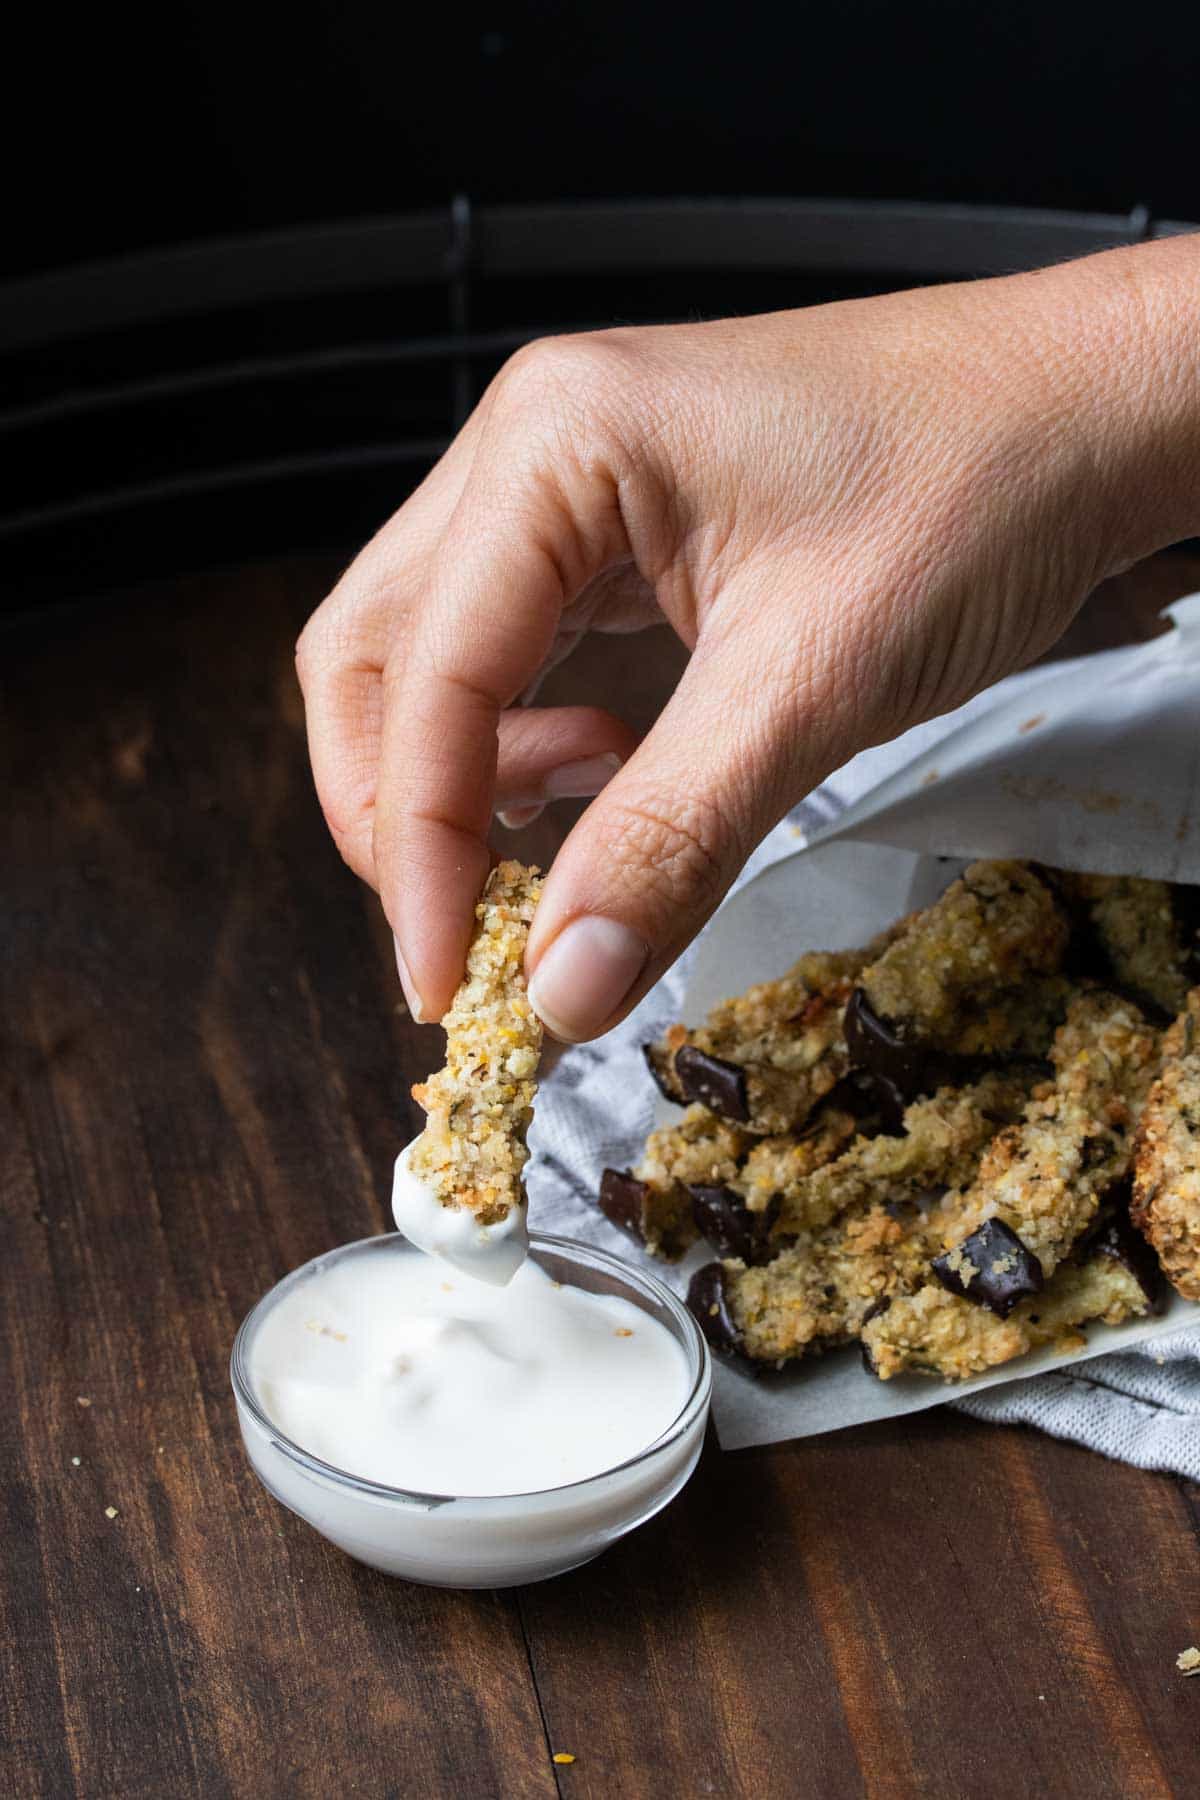 Hand dipping an eggplant fry into a white sauce